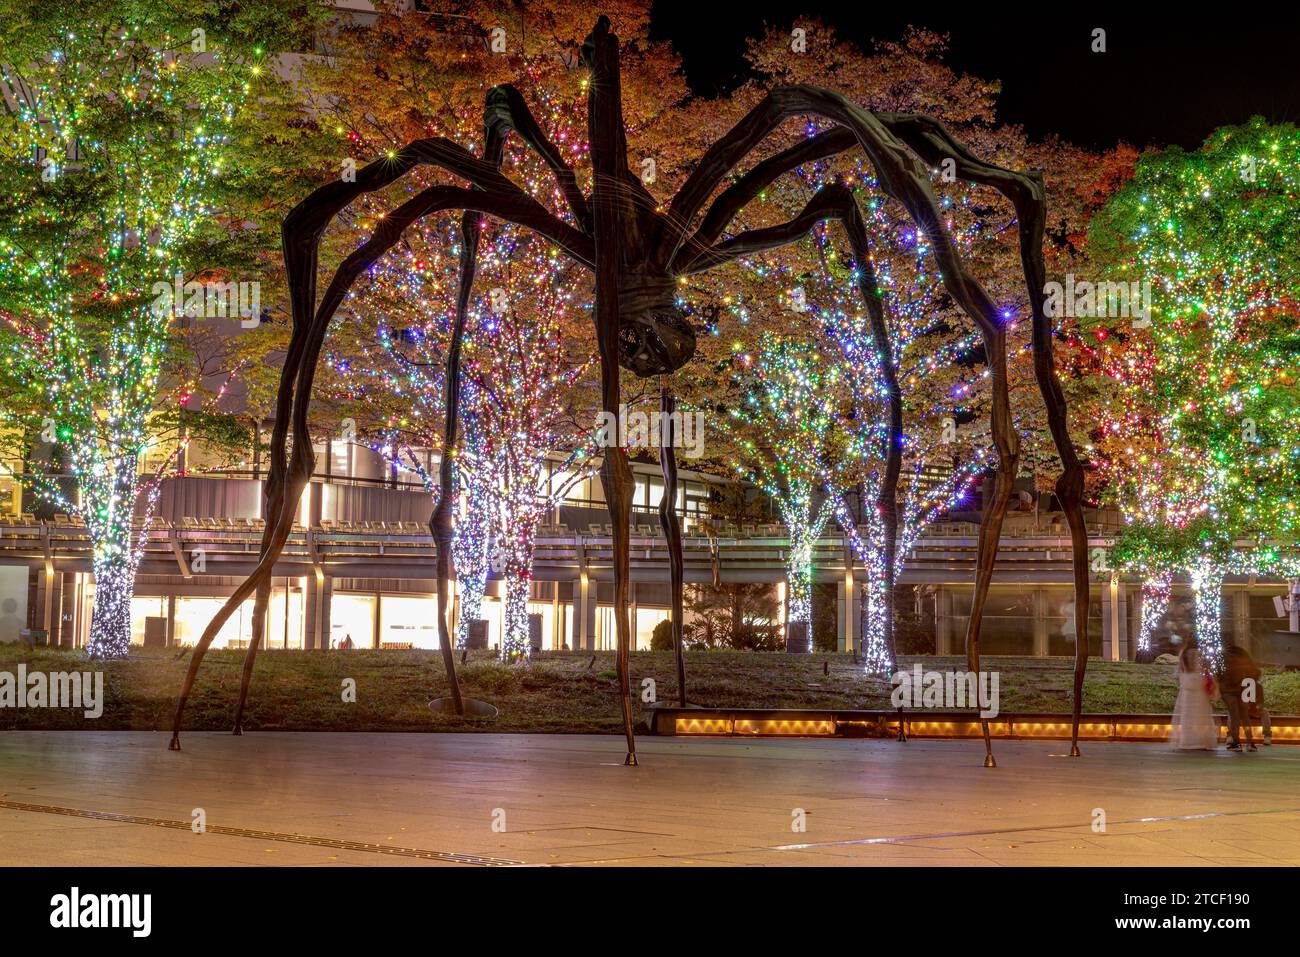 spider sculpture in the Roppongi area of Tokyo with Christmas lights Stock Photo